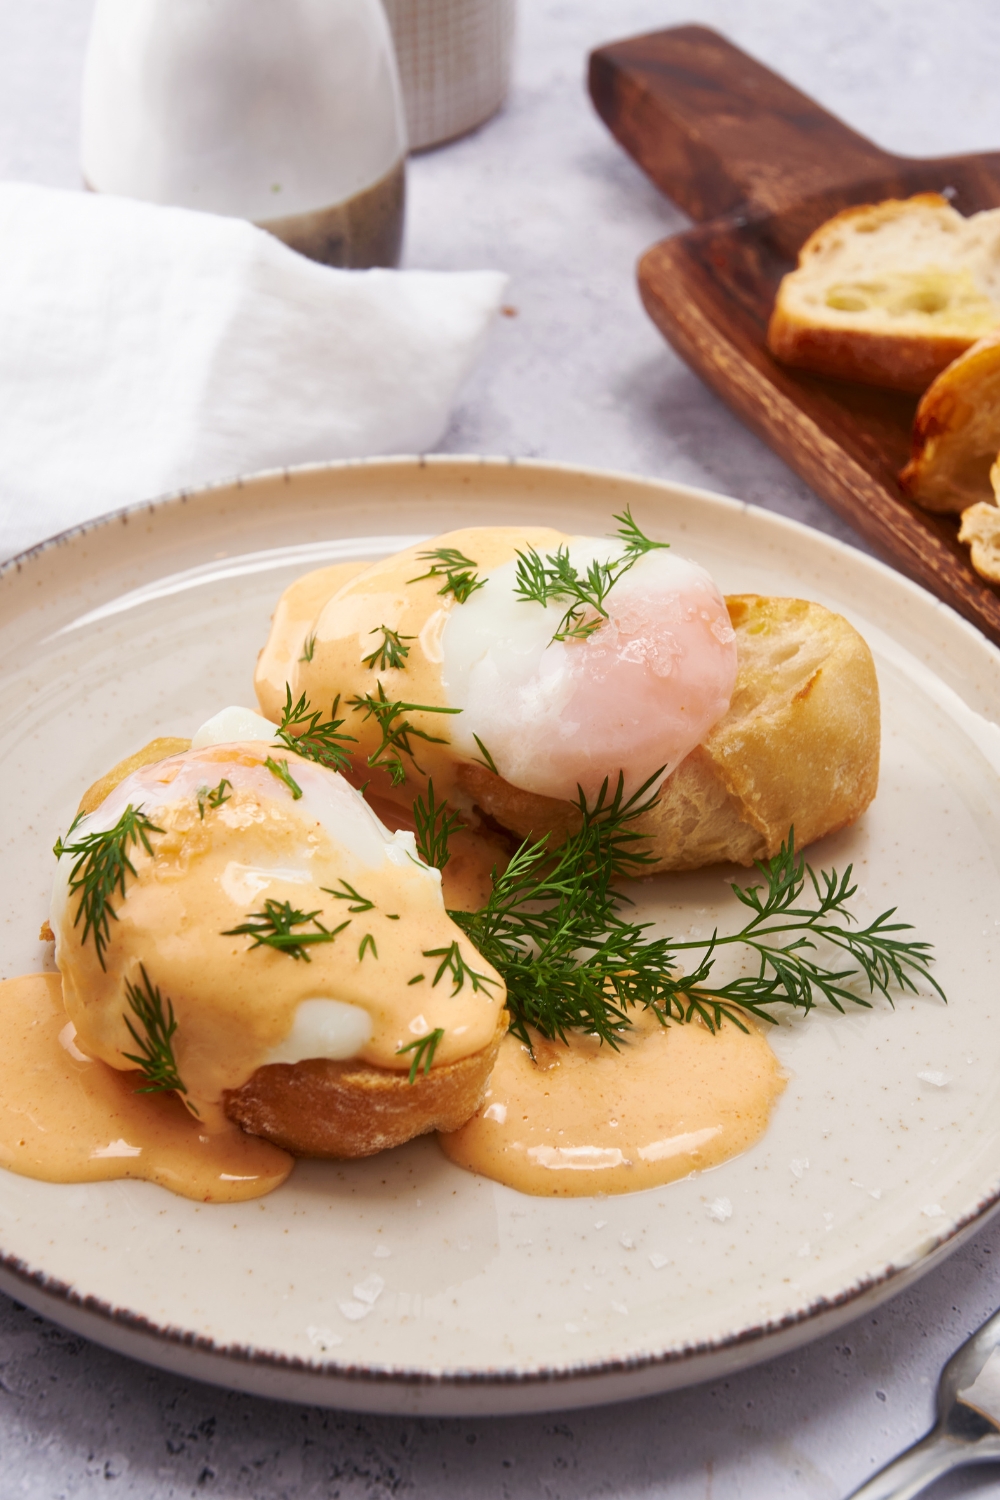 Two pieces of toast on a plate, each topped with a poached egg, Hollandaise sauce, and fresh dill.